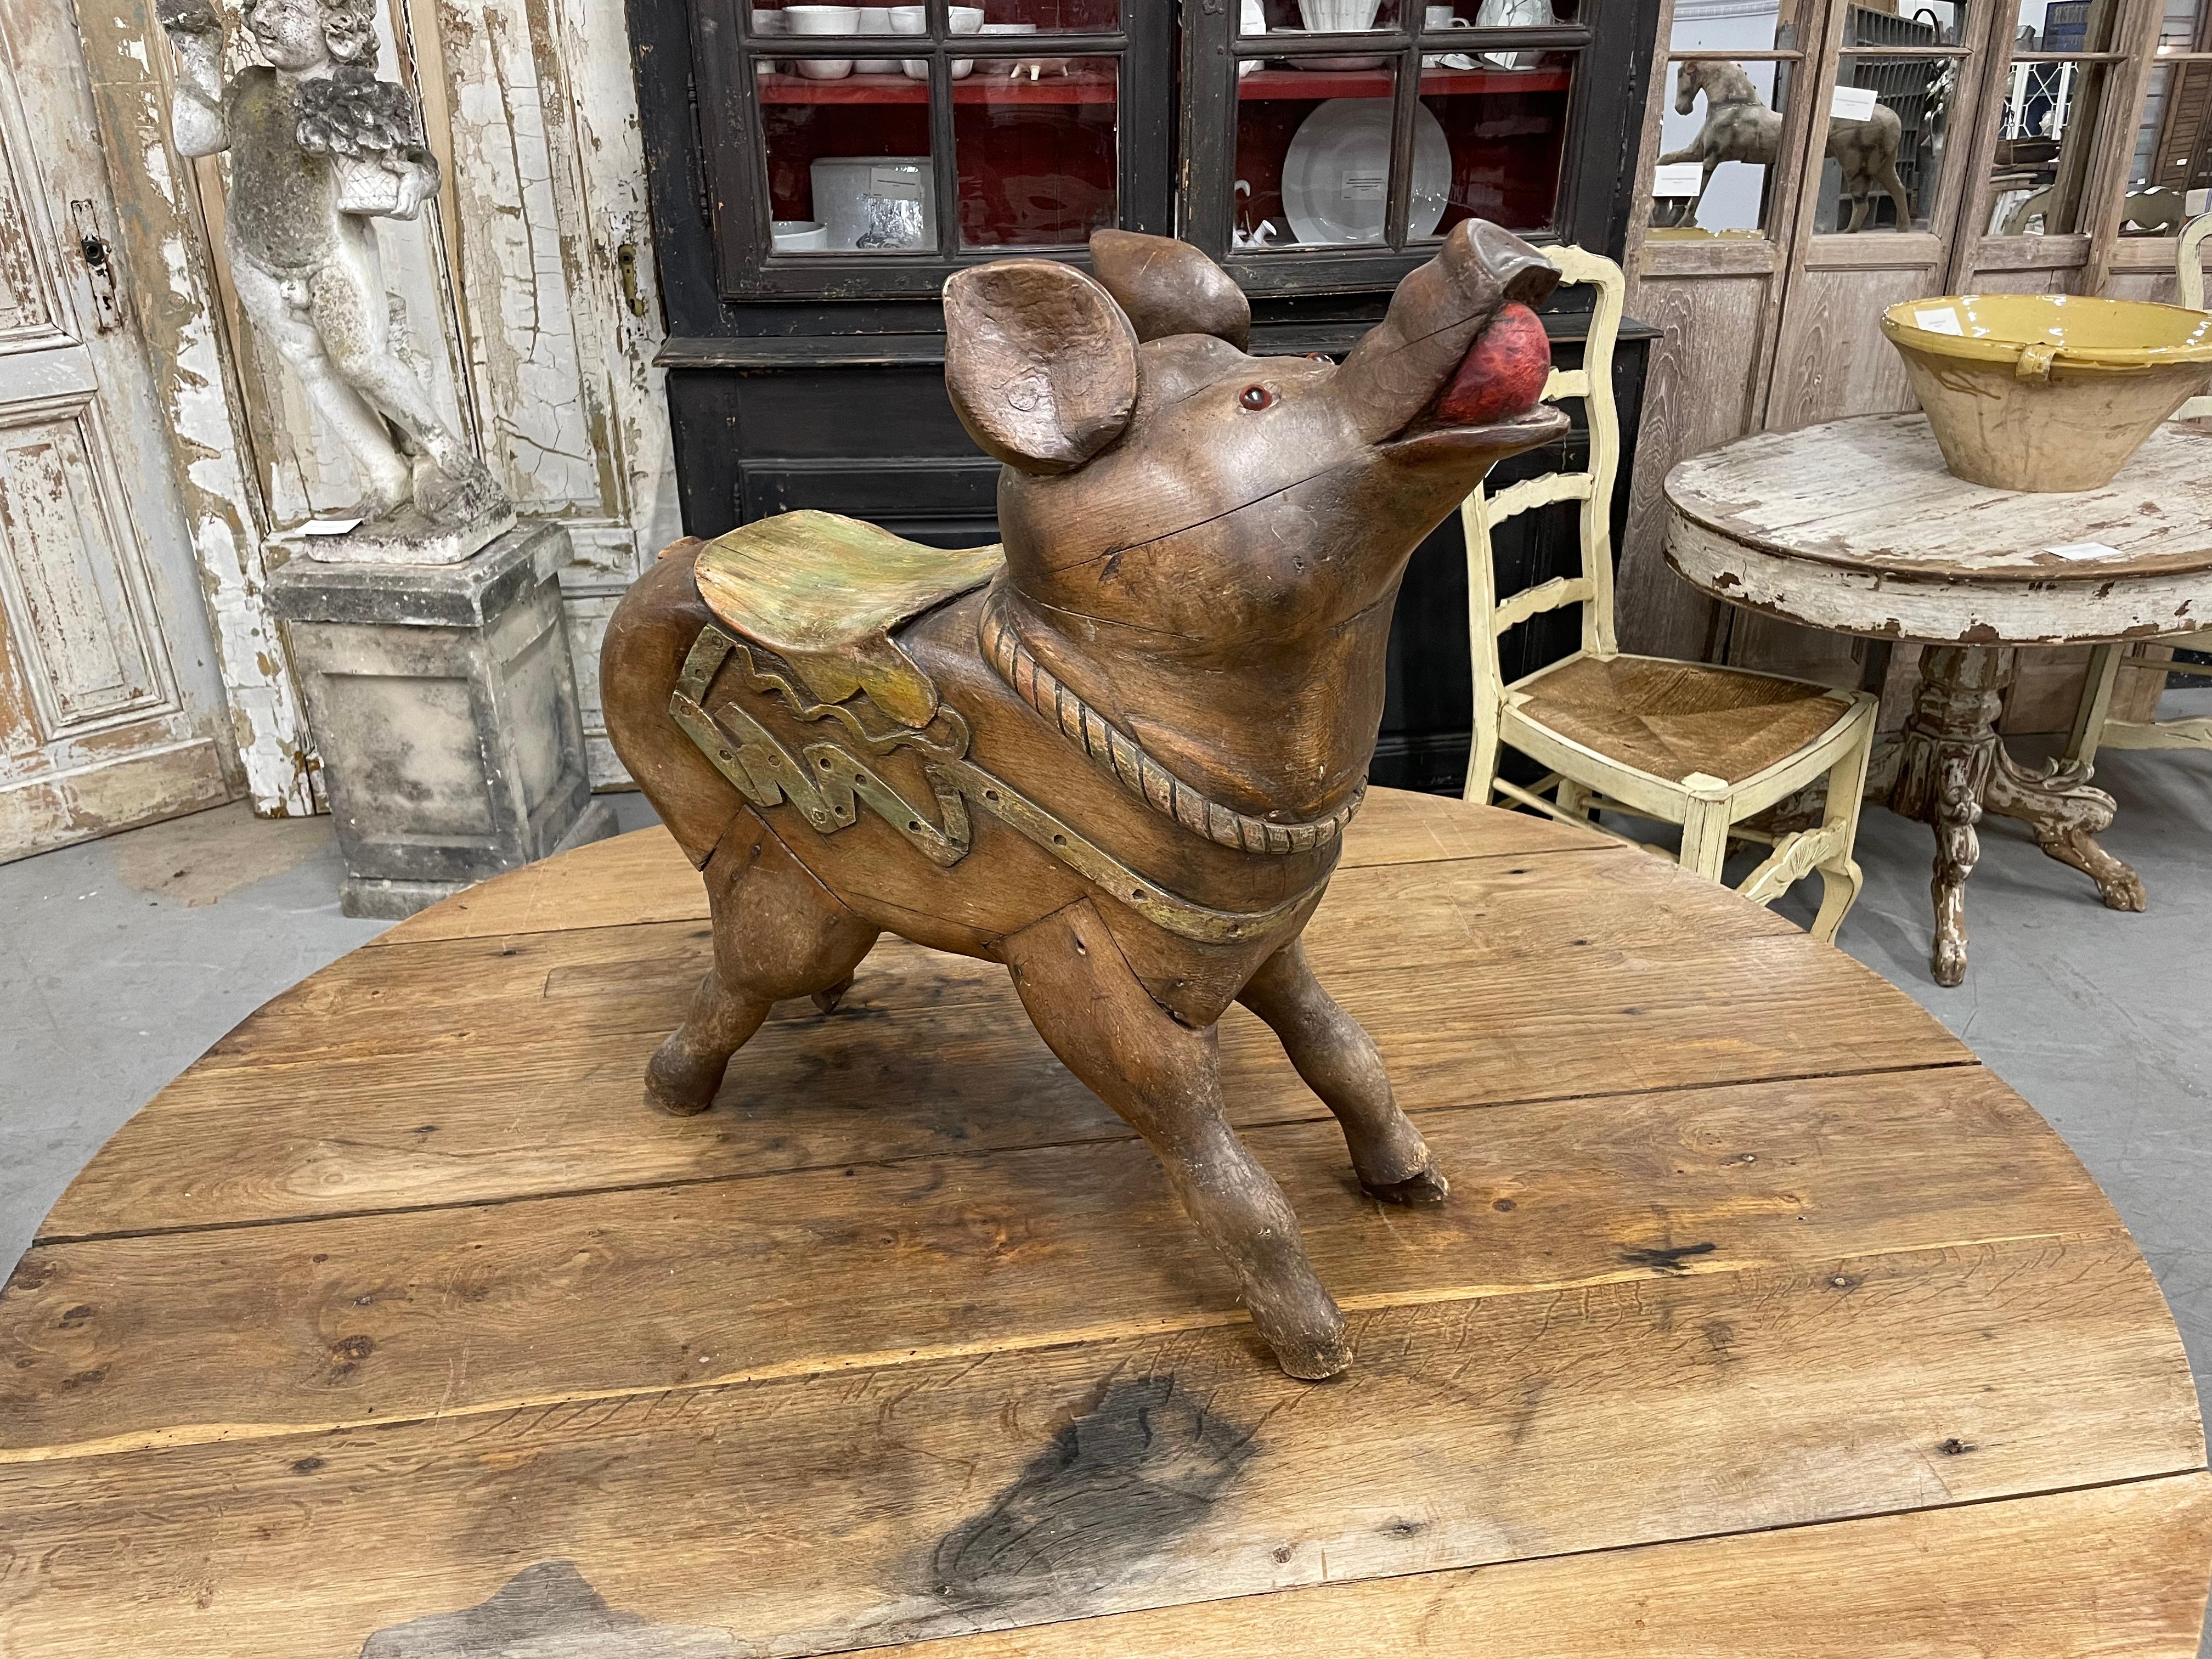 Rare antique French hand carved children's carousel pig or monter le cochon.

This primitive polychromed grunter is full of charm, character and quirkiness with a beautifully carved harness and saddle. A bright red apple is firmly gripped in his